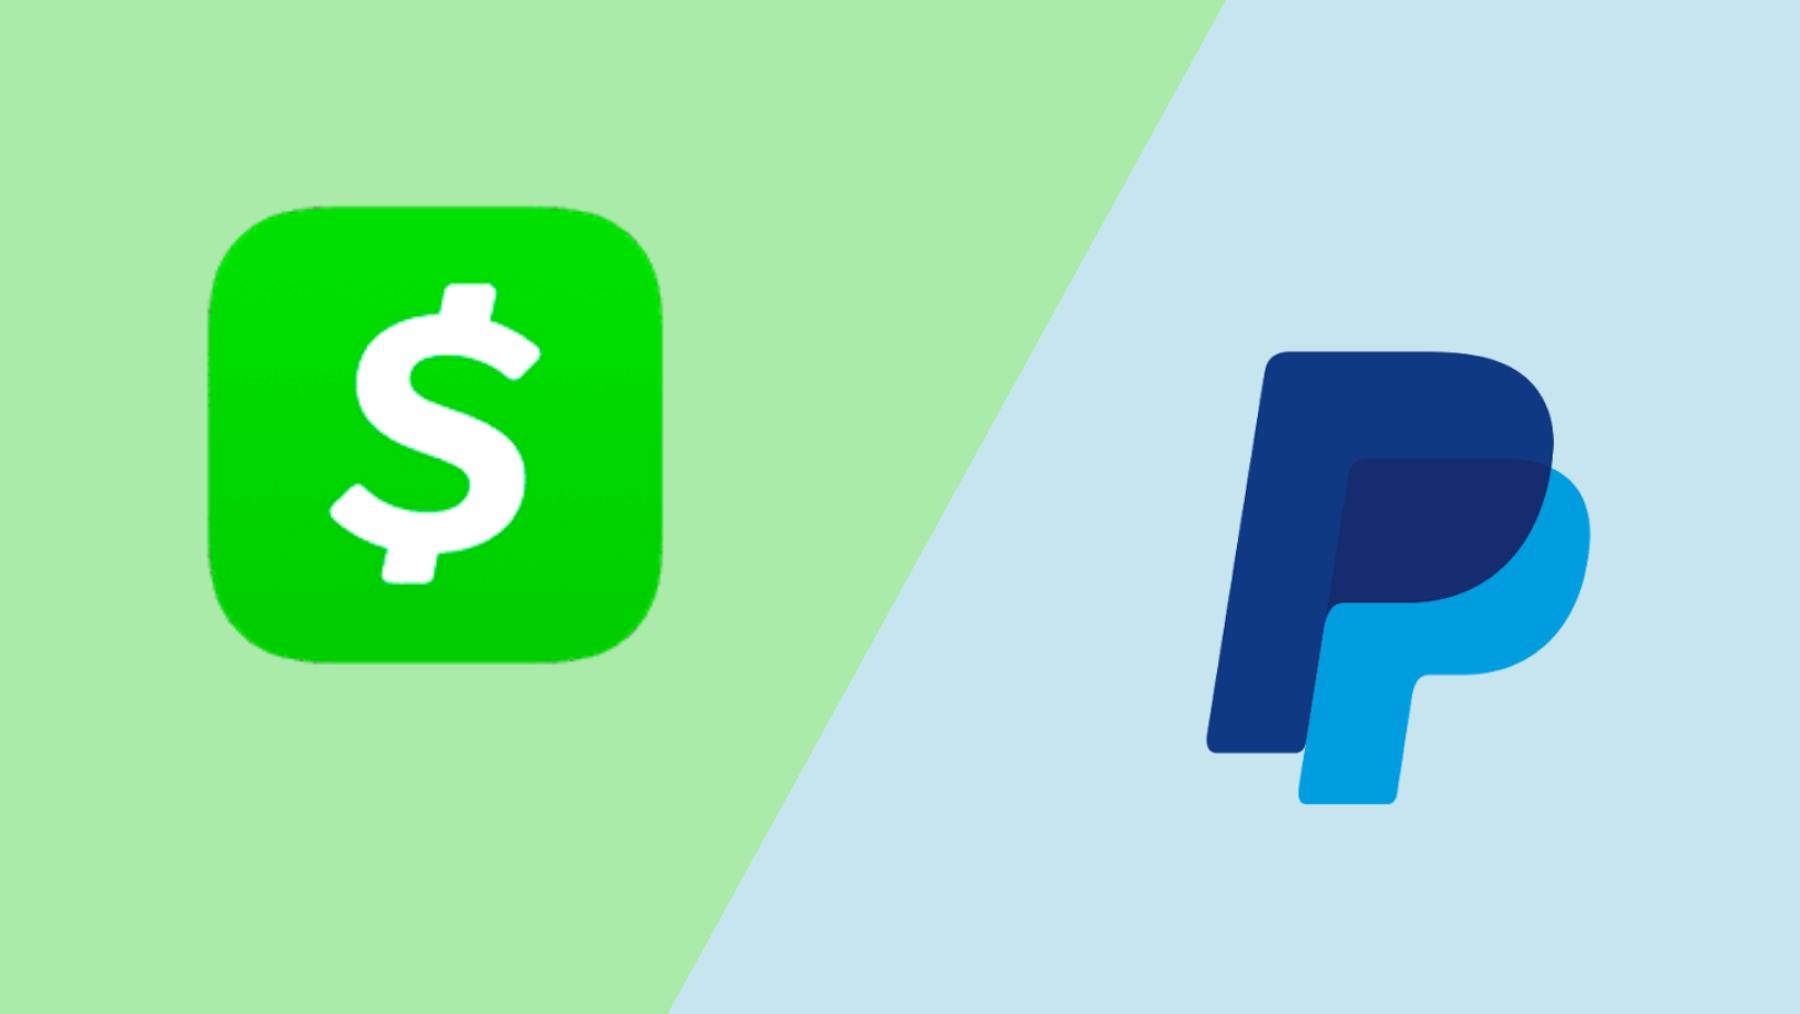 Cash App Vs Paypal: Which Has Better Safety, Fees & Fx-Rates?